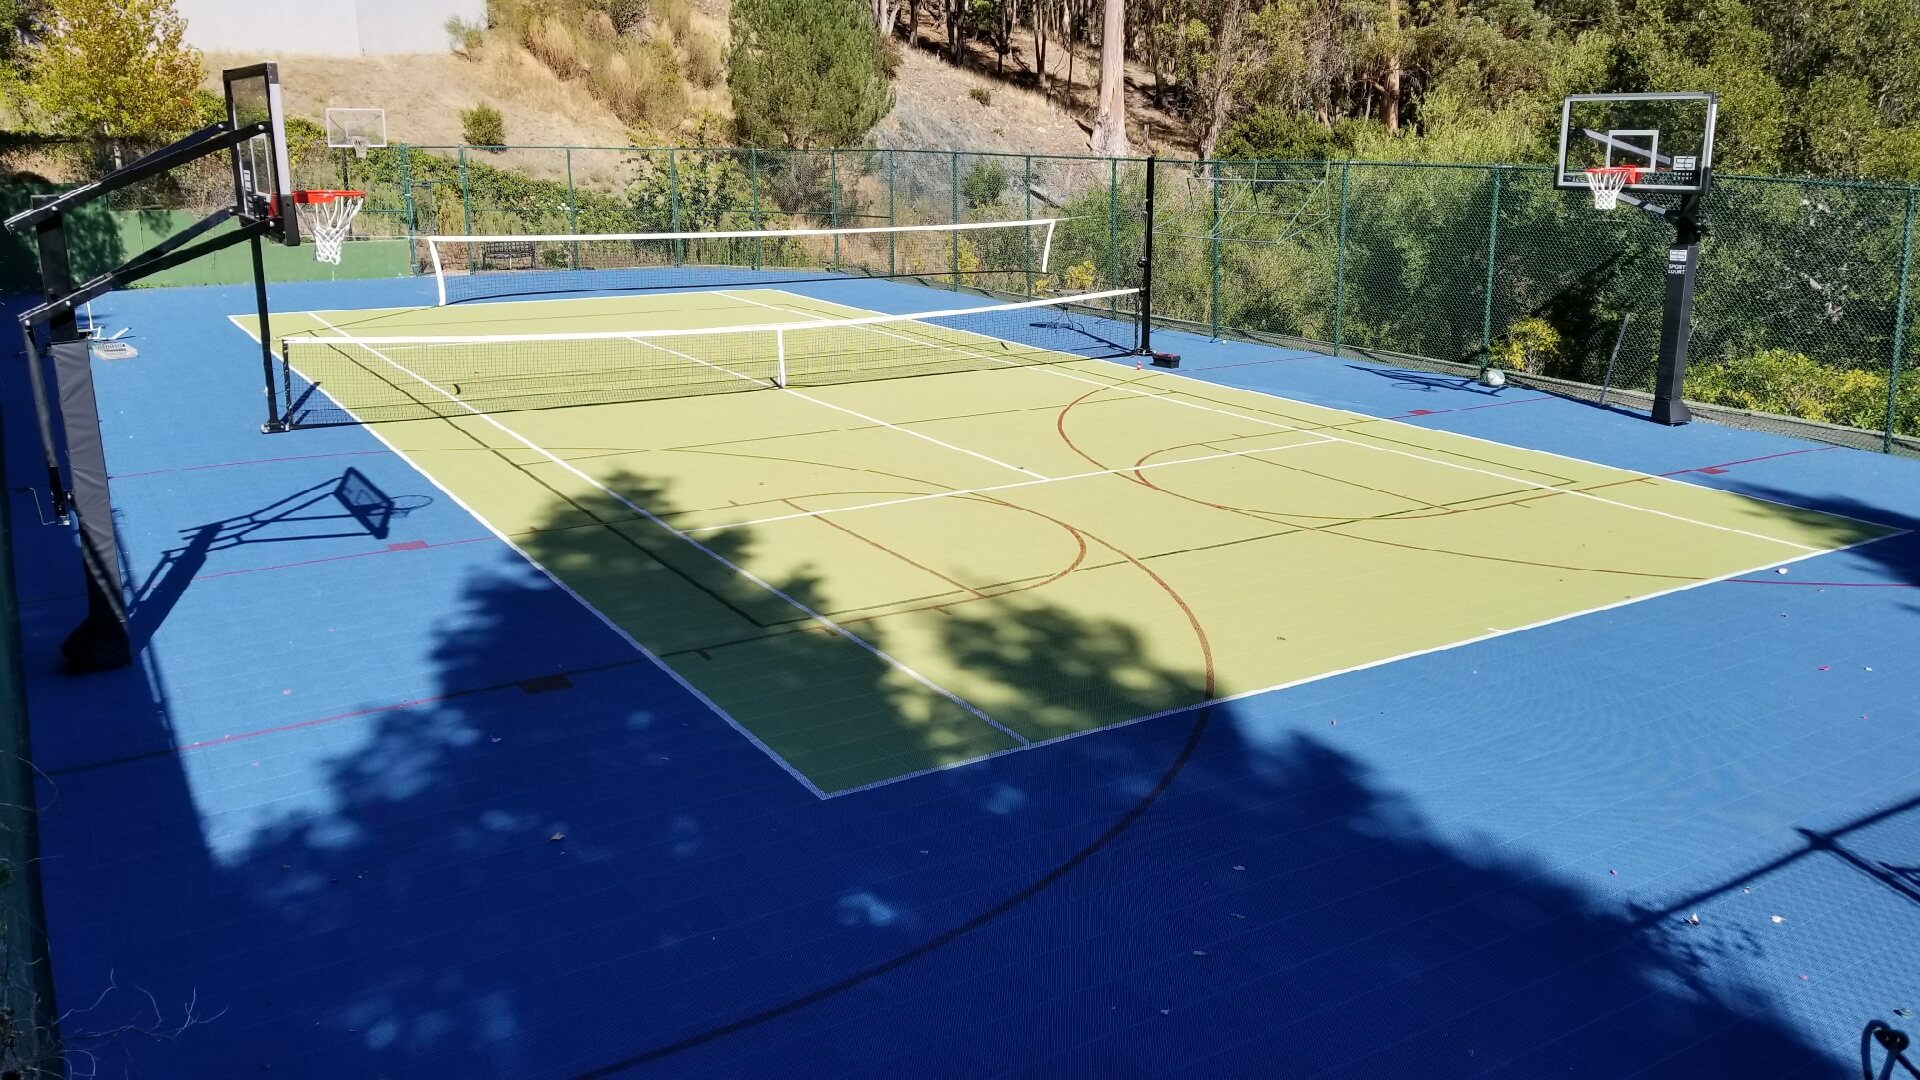 Backyard Sport Court Multi-Game, Outdoor Residential